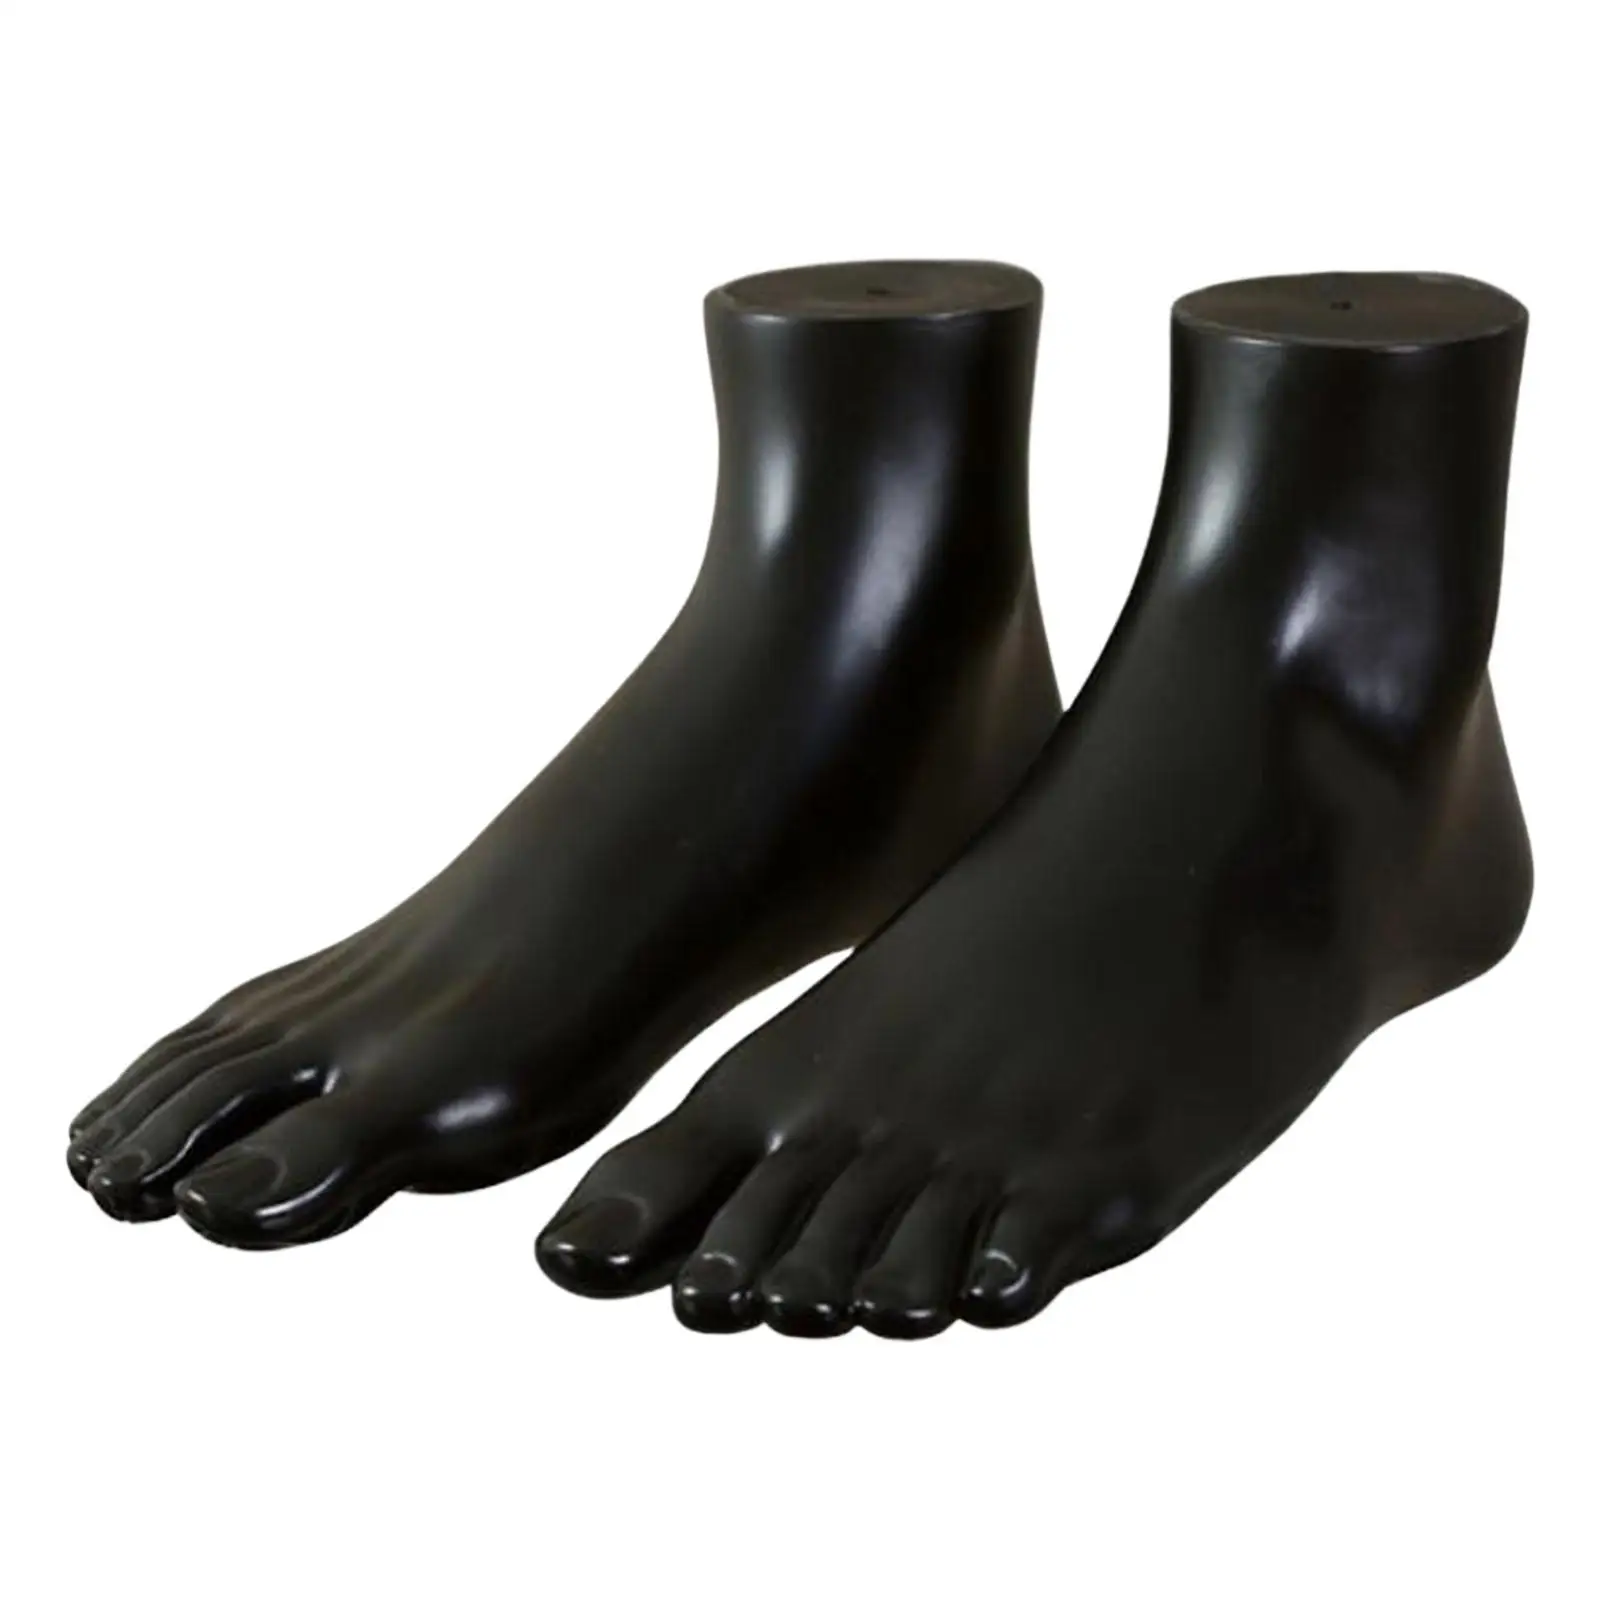 A Pair Mannequin Adult Feet Socks Display Props Manikin for Toe Rings Shop